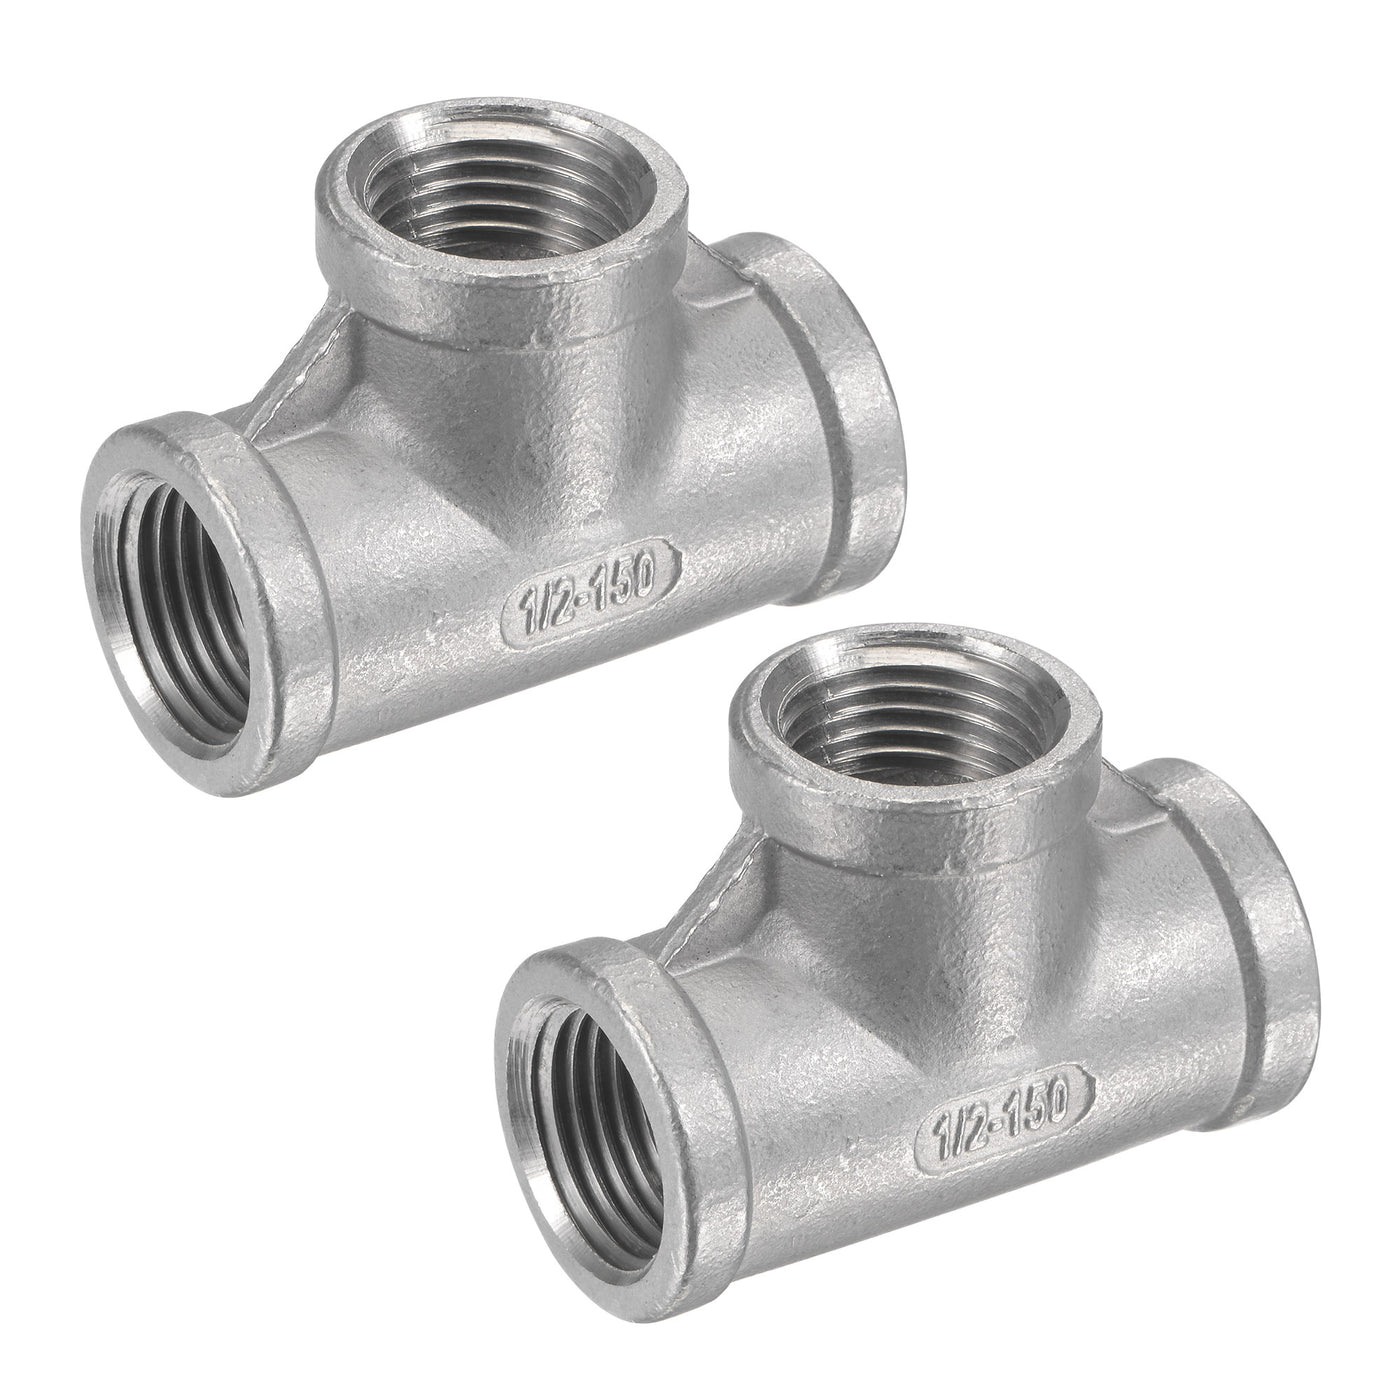 Uxcell Uxcell Pipe Fitting Tee 1/4 NPT Female Thread Hose Connector Adapter, 304 Stainless Steel, Pack of 2